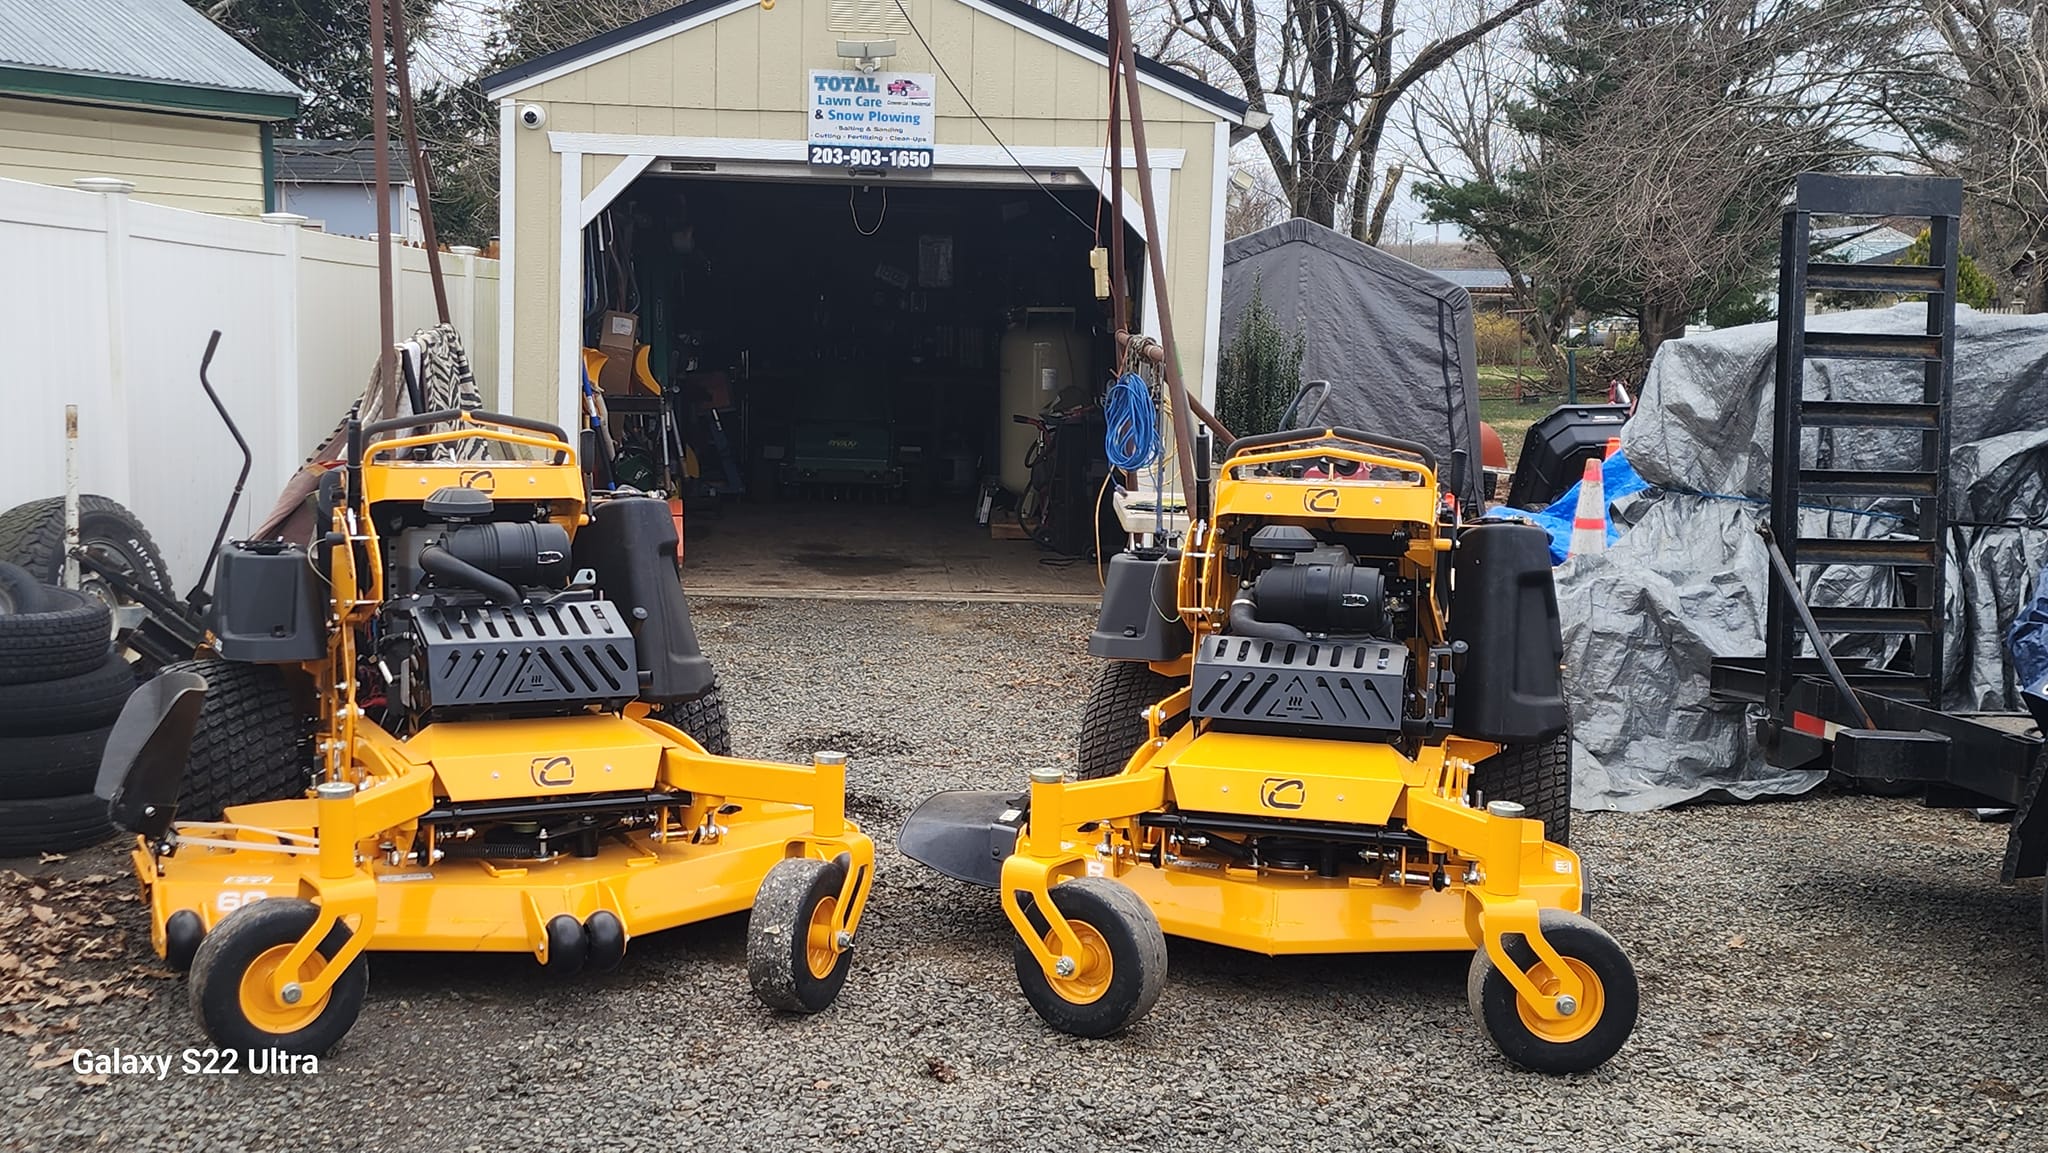 Total Lawn Care and Snow Plowing 14 Ann St, North Branford Connecticut 06471